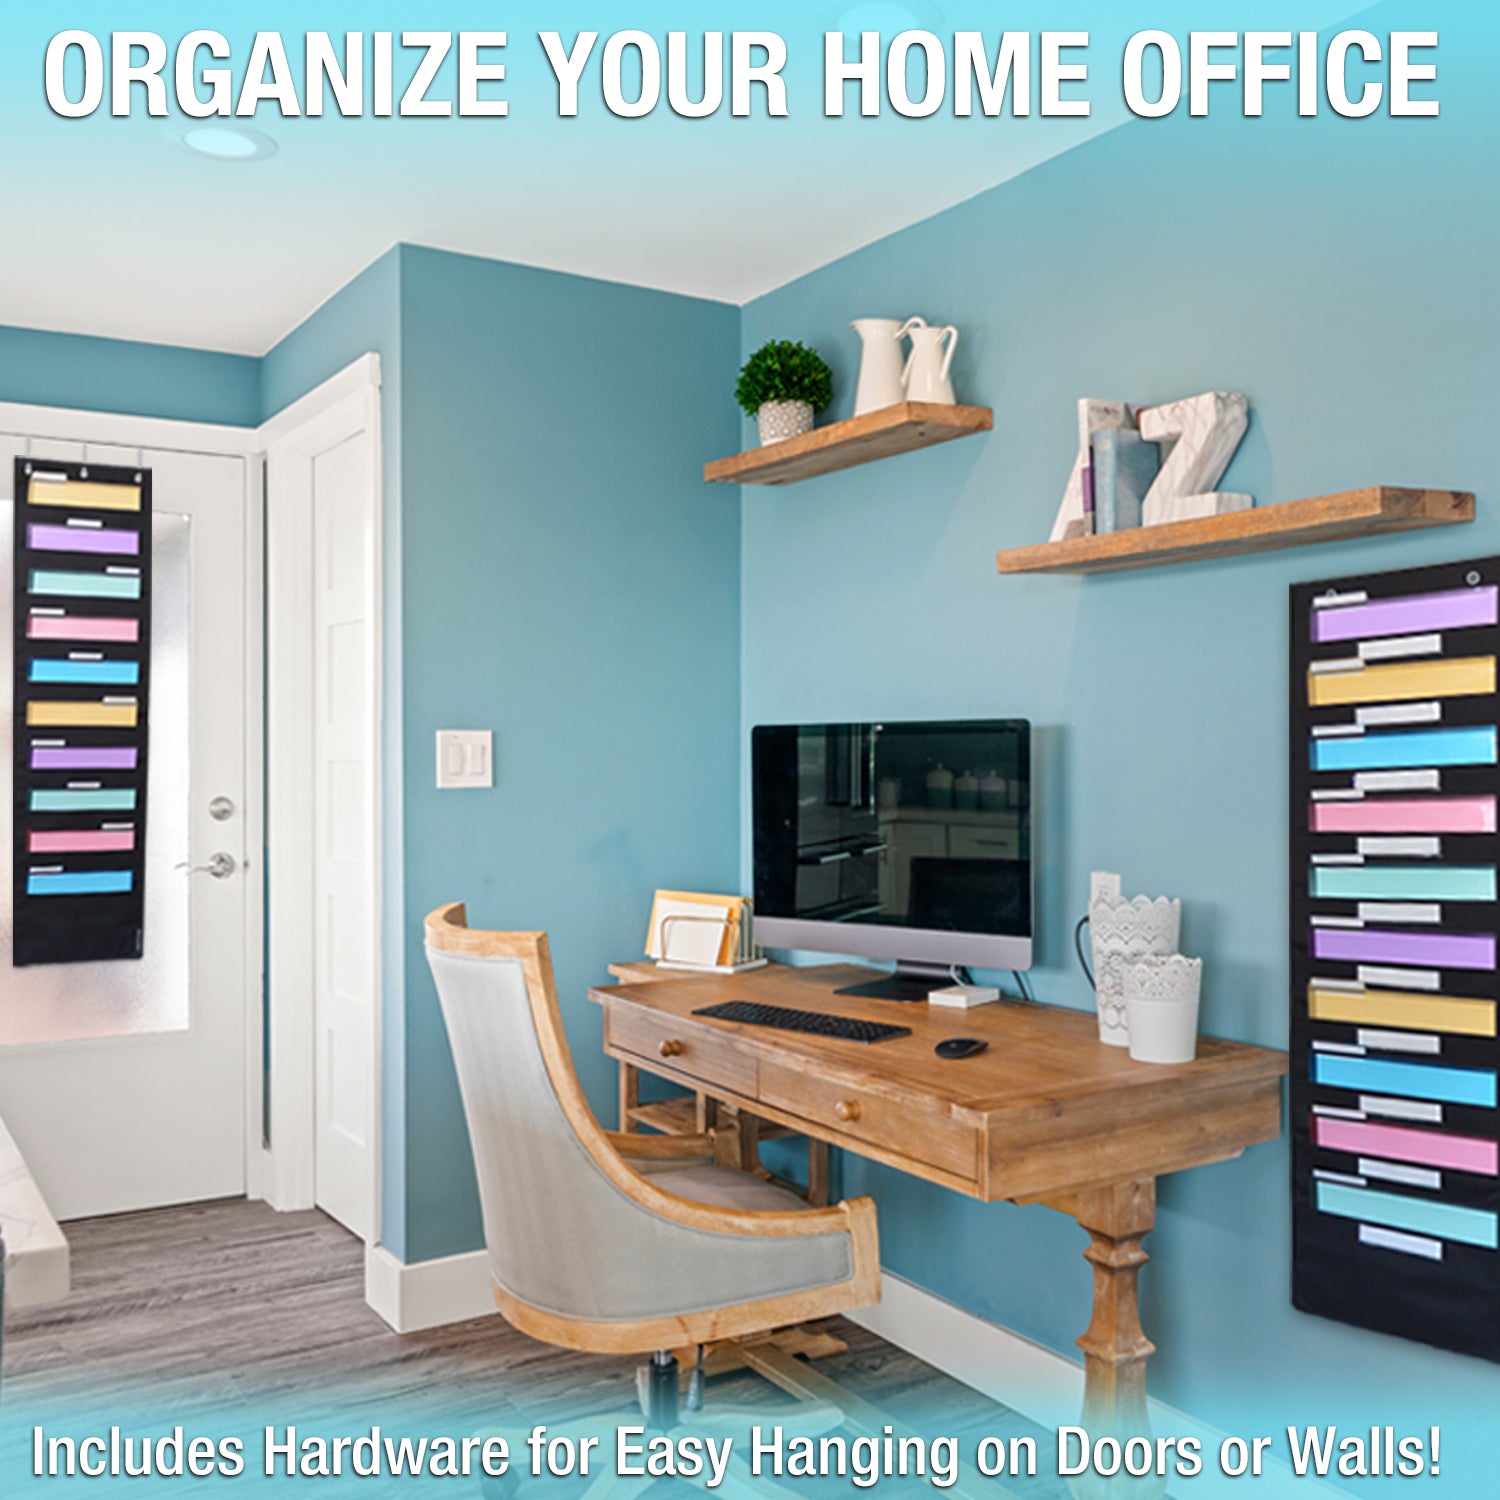 WalMaster Heavy Duty, 20-Pocket Wall Chart Filing System | Ultimate Office